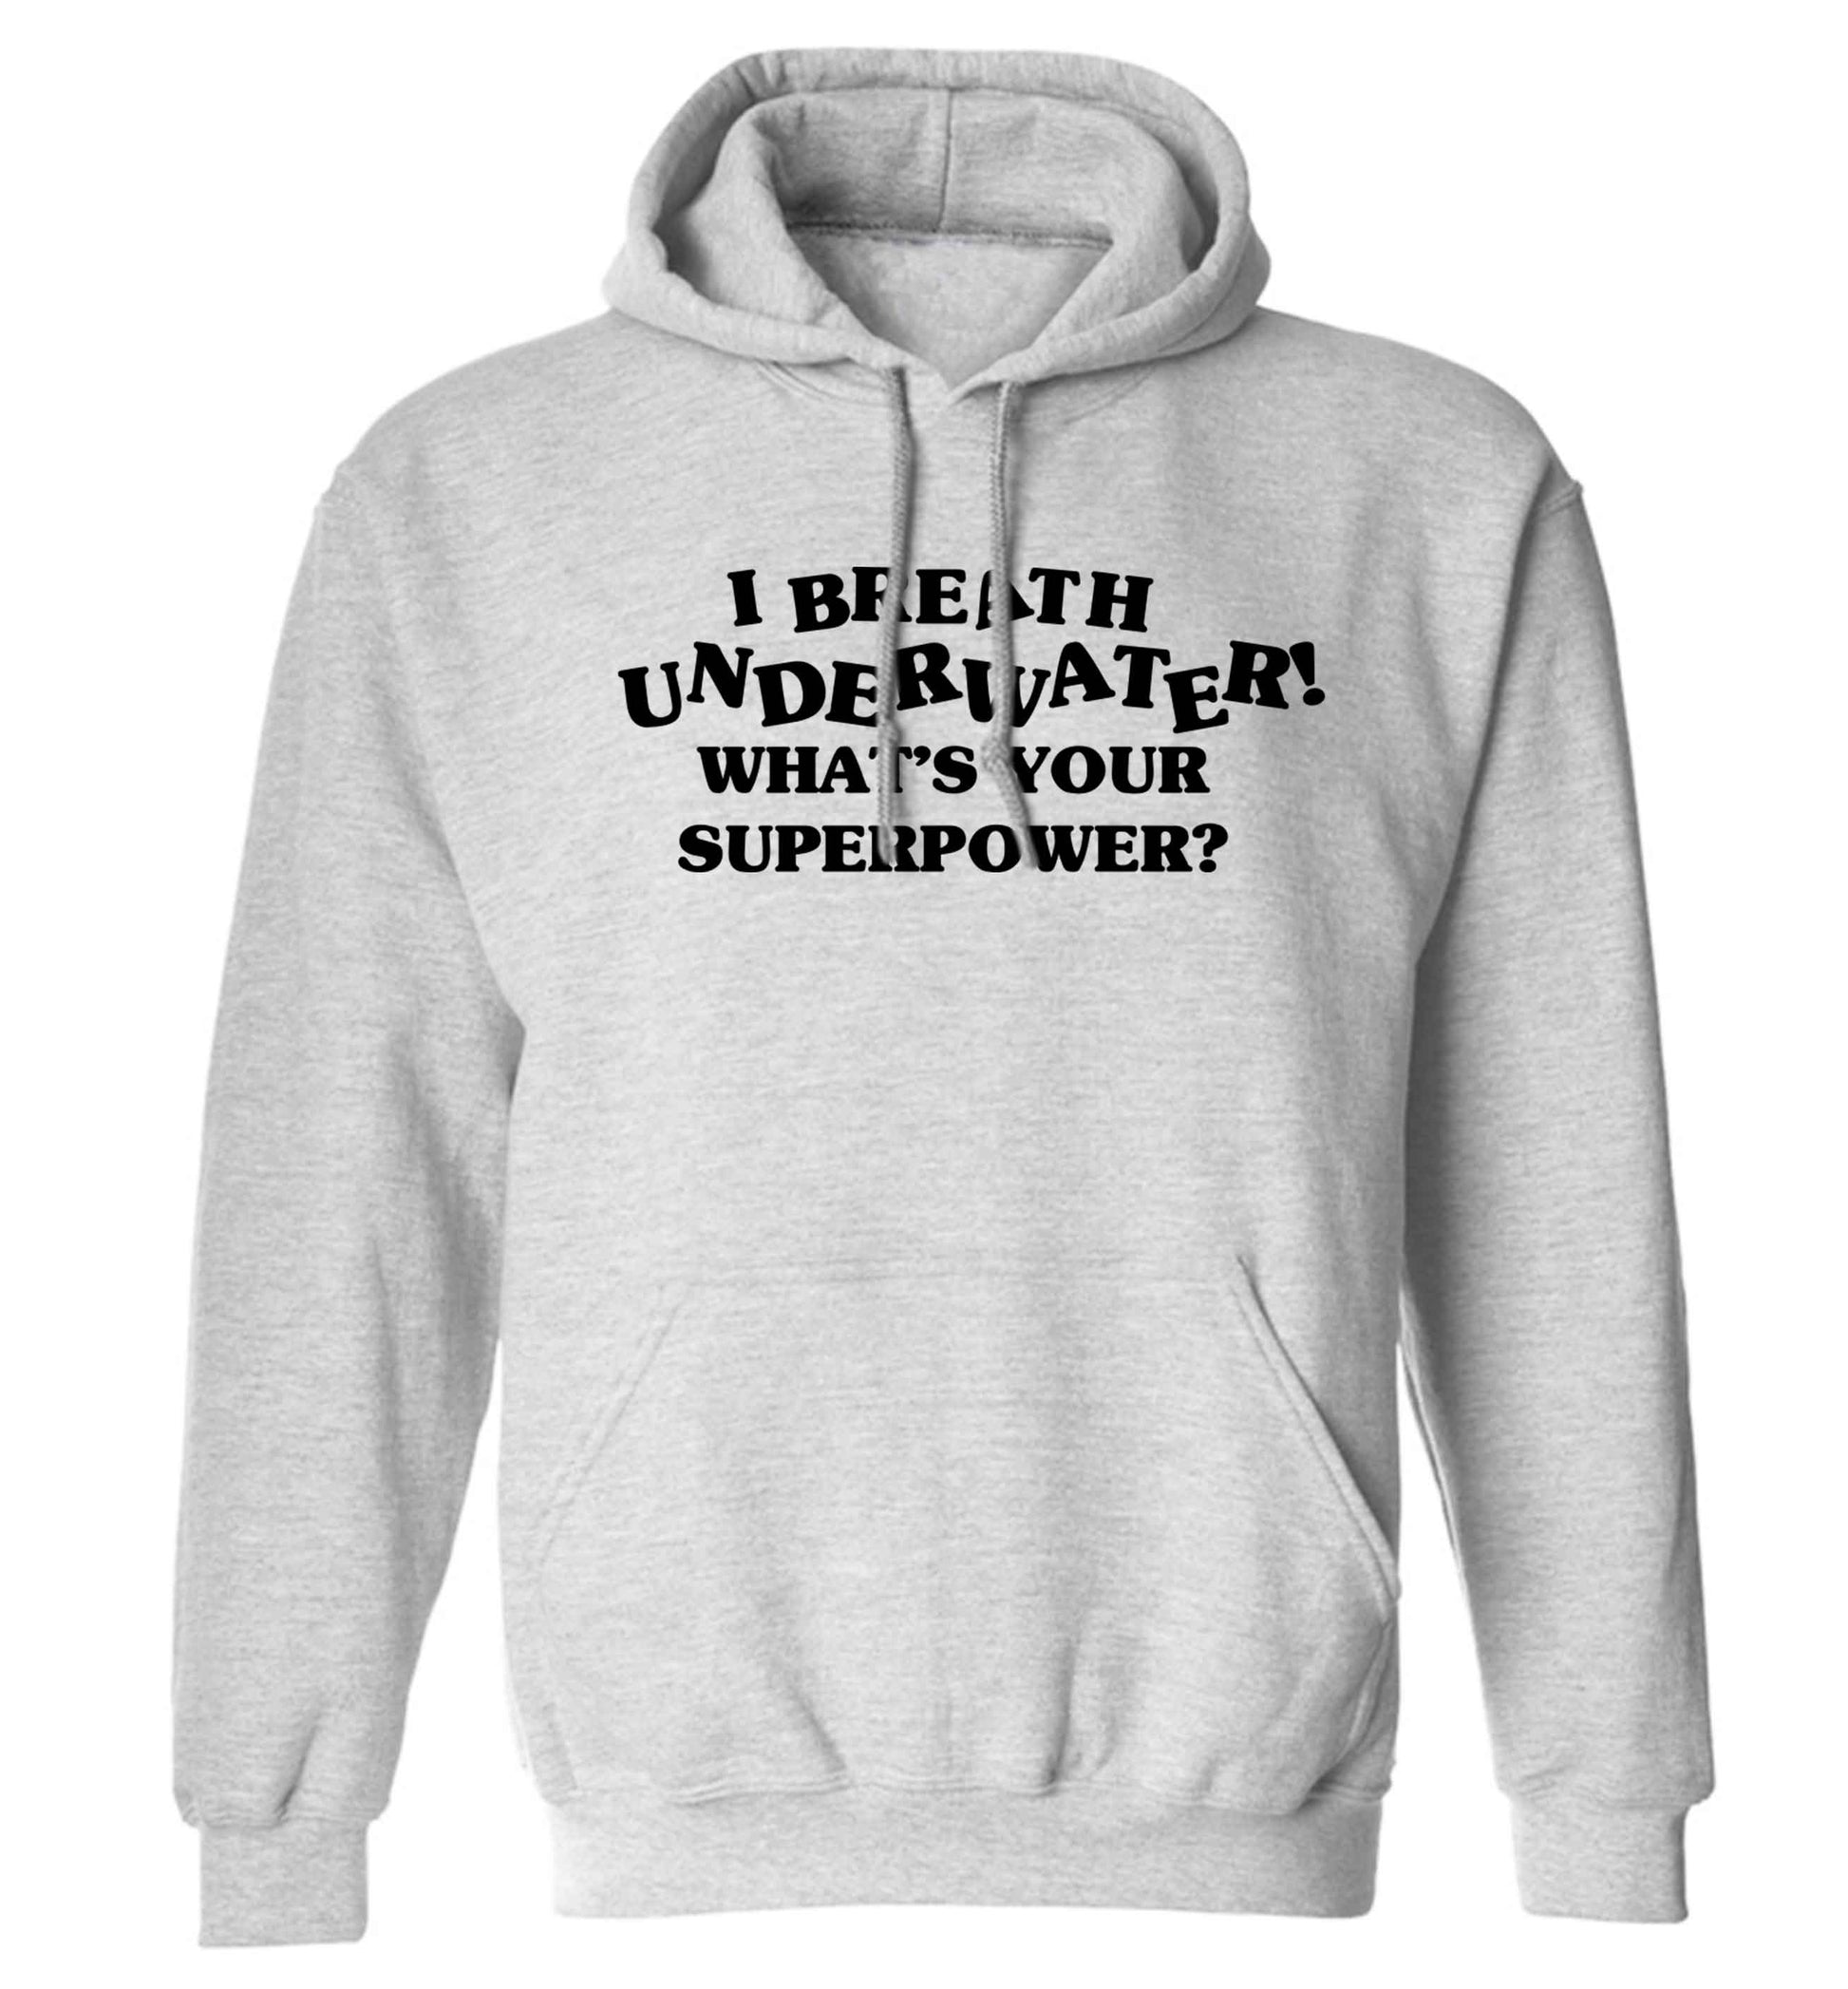 I breath underwater what's your superpower? adults unisex grey hoodie 2XL